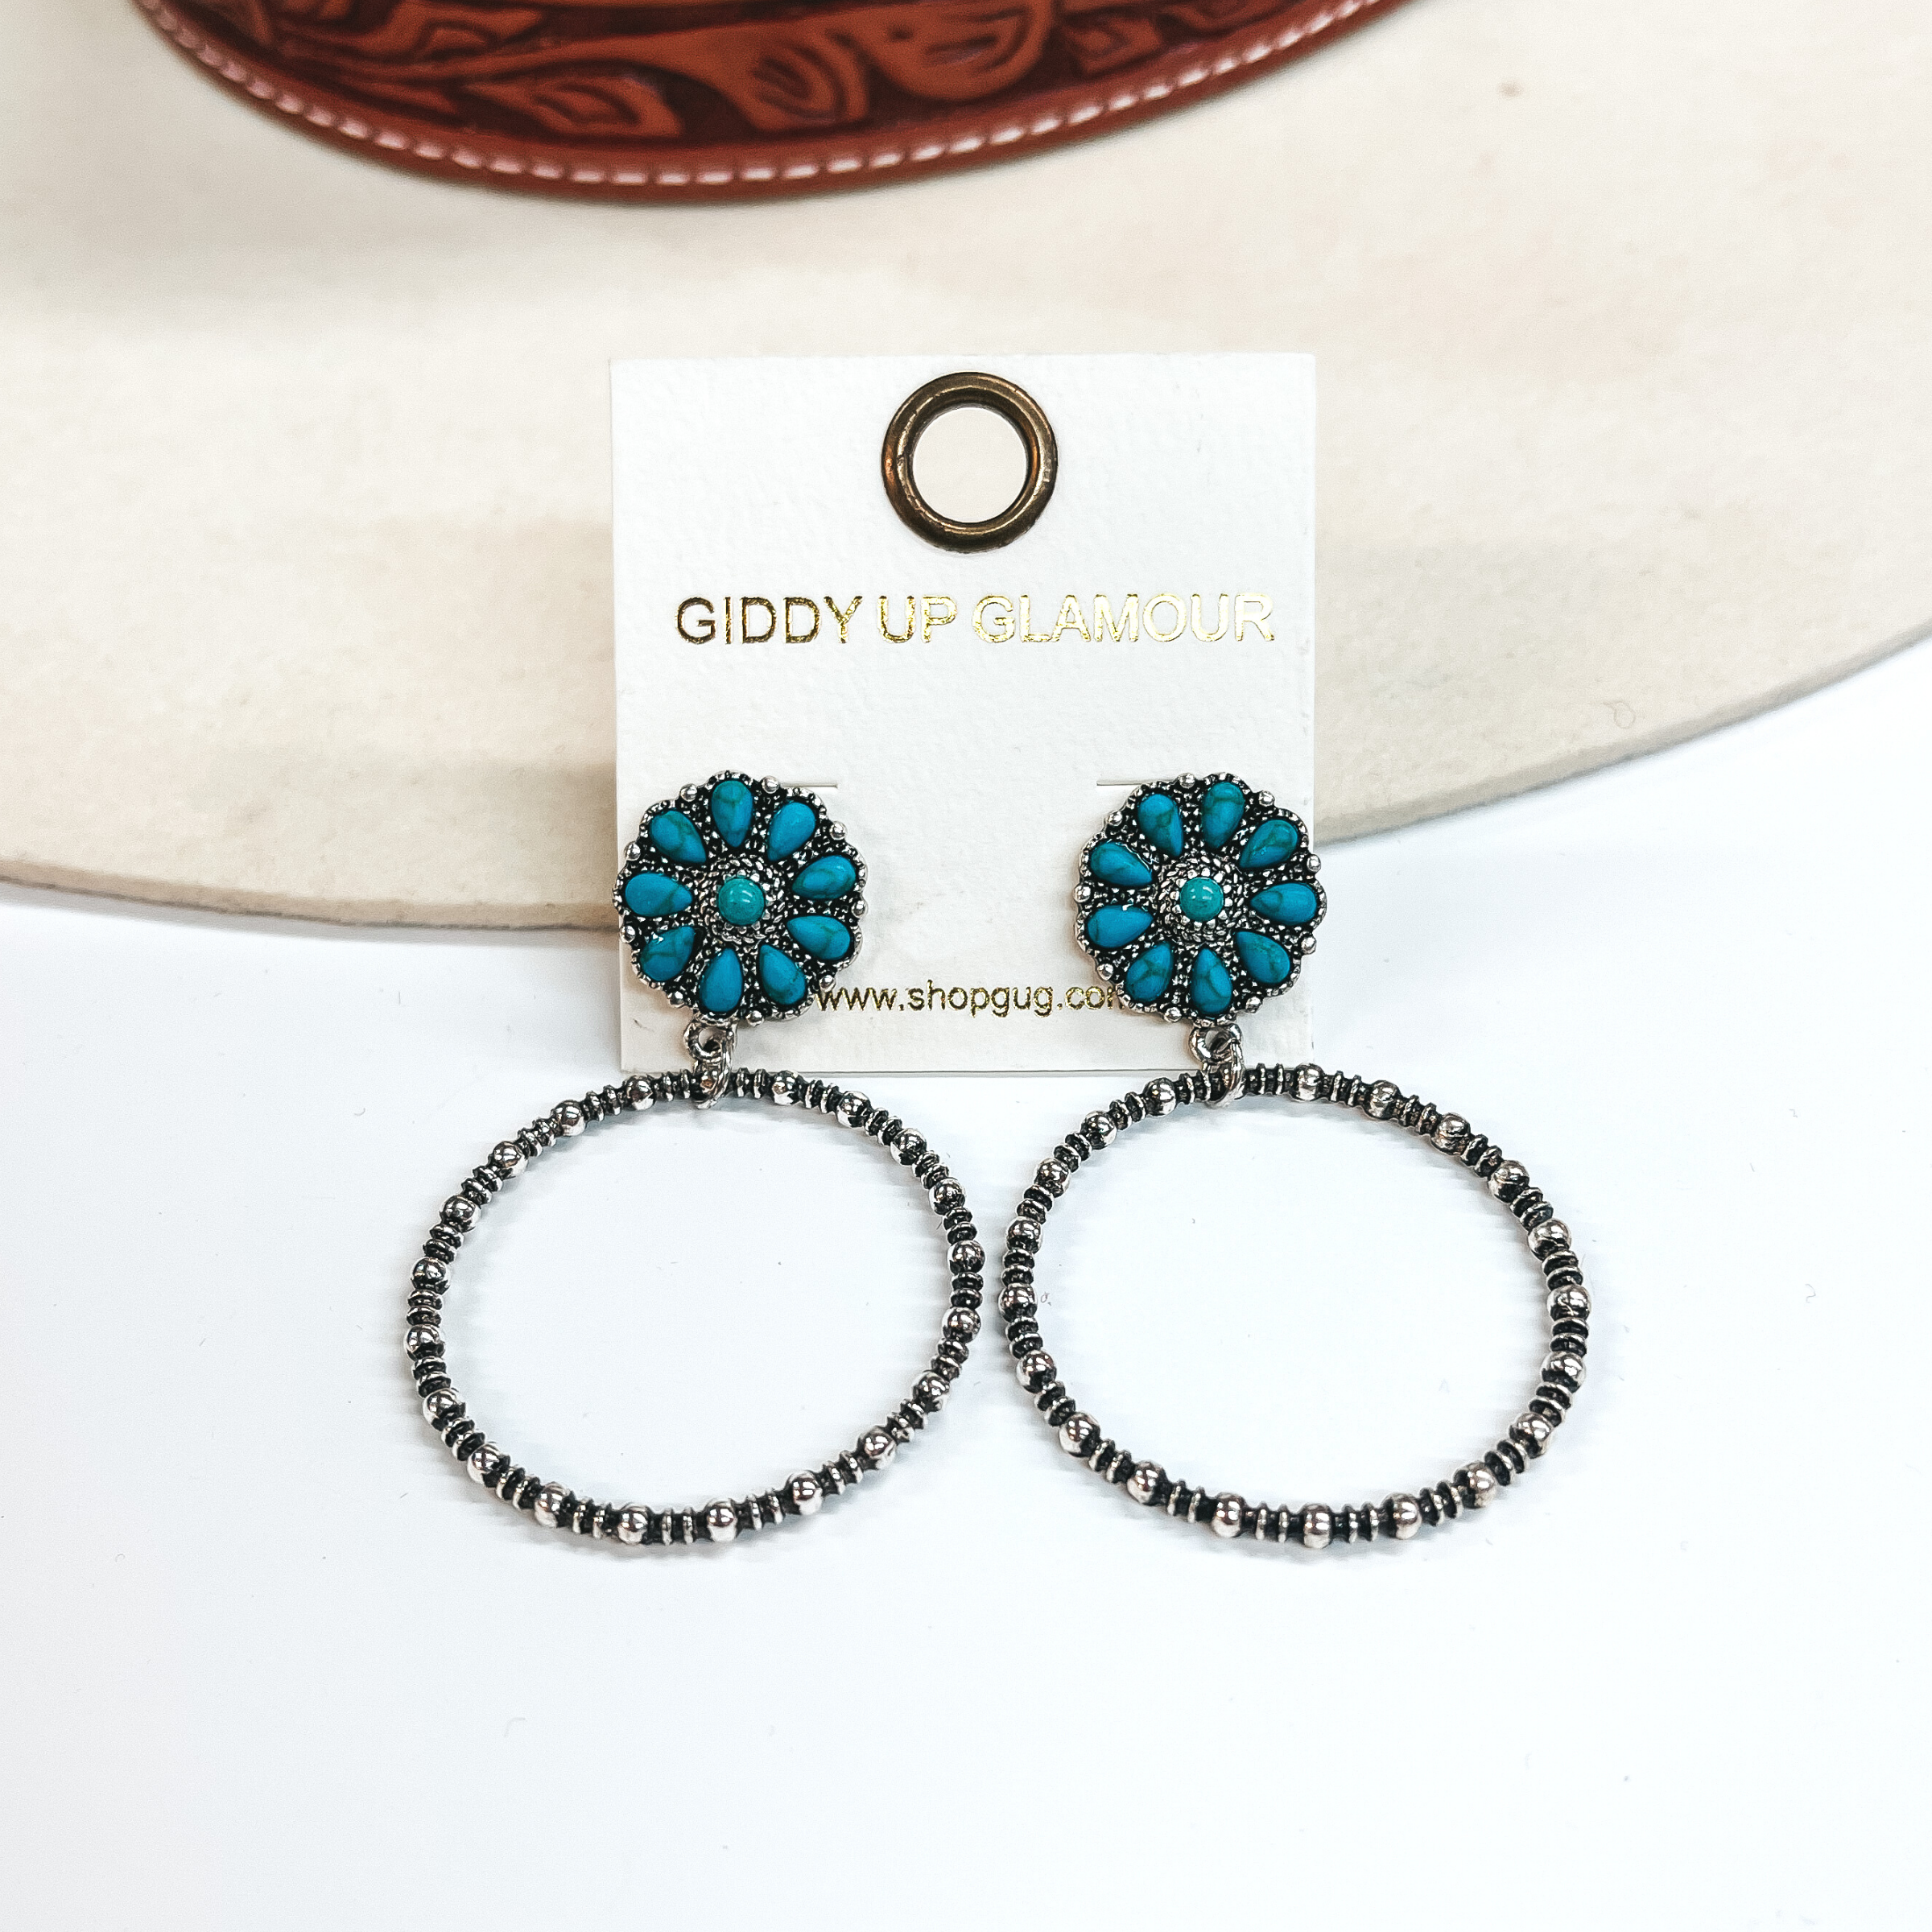 These are circle cluster post earrings with a silver  circle drop. The circle cluster has faux turquoise  stones. These earrings are taken on a white  background and leaned up against an ivory hat.